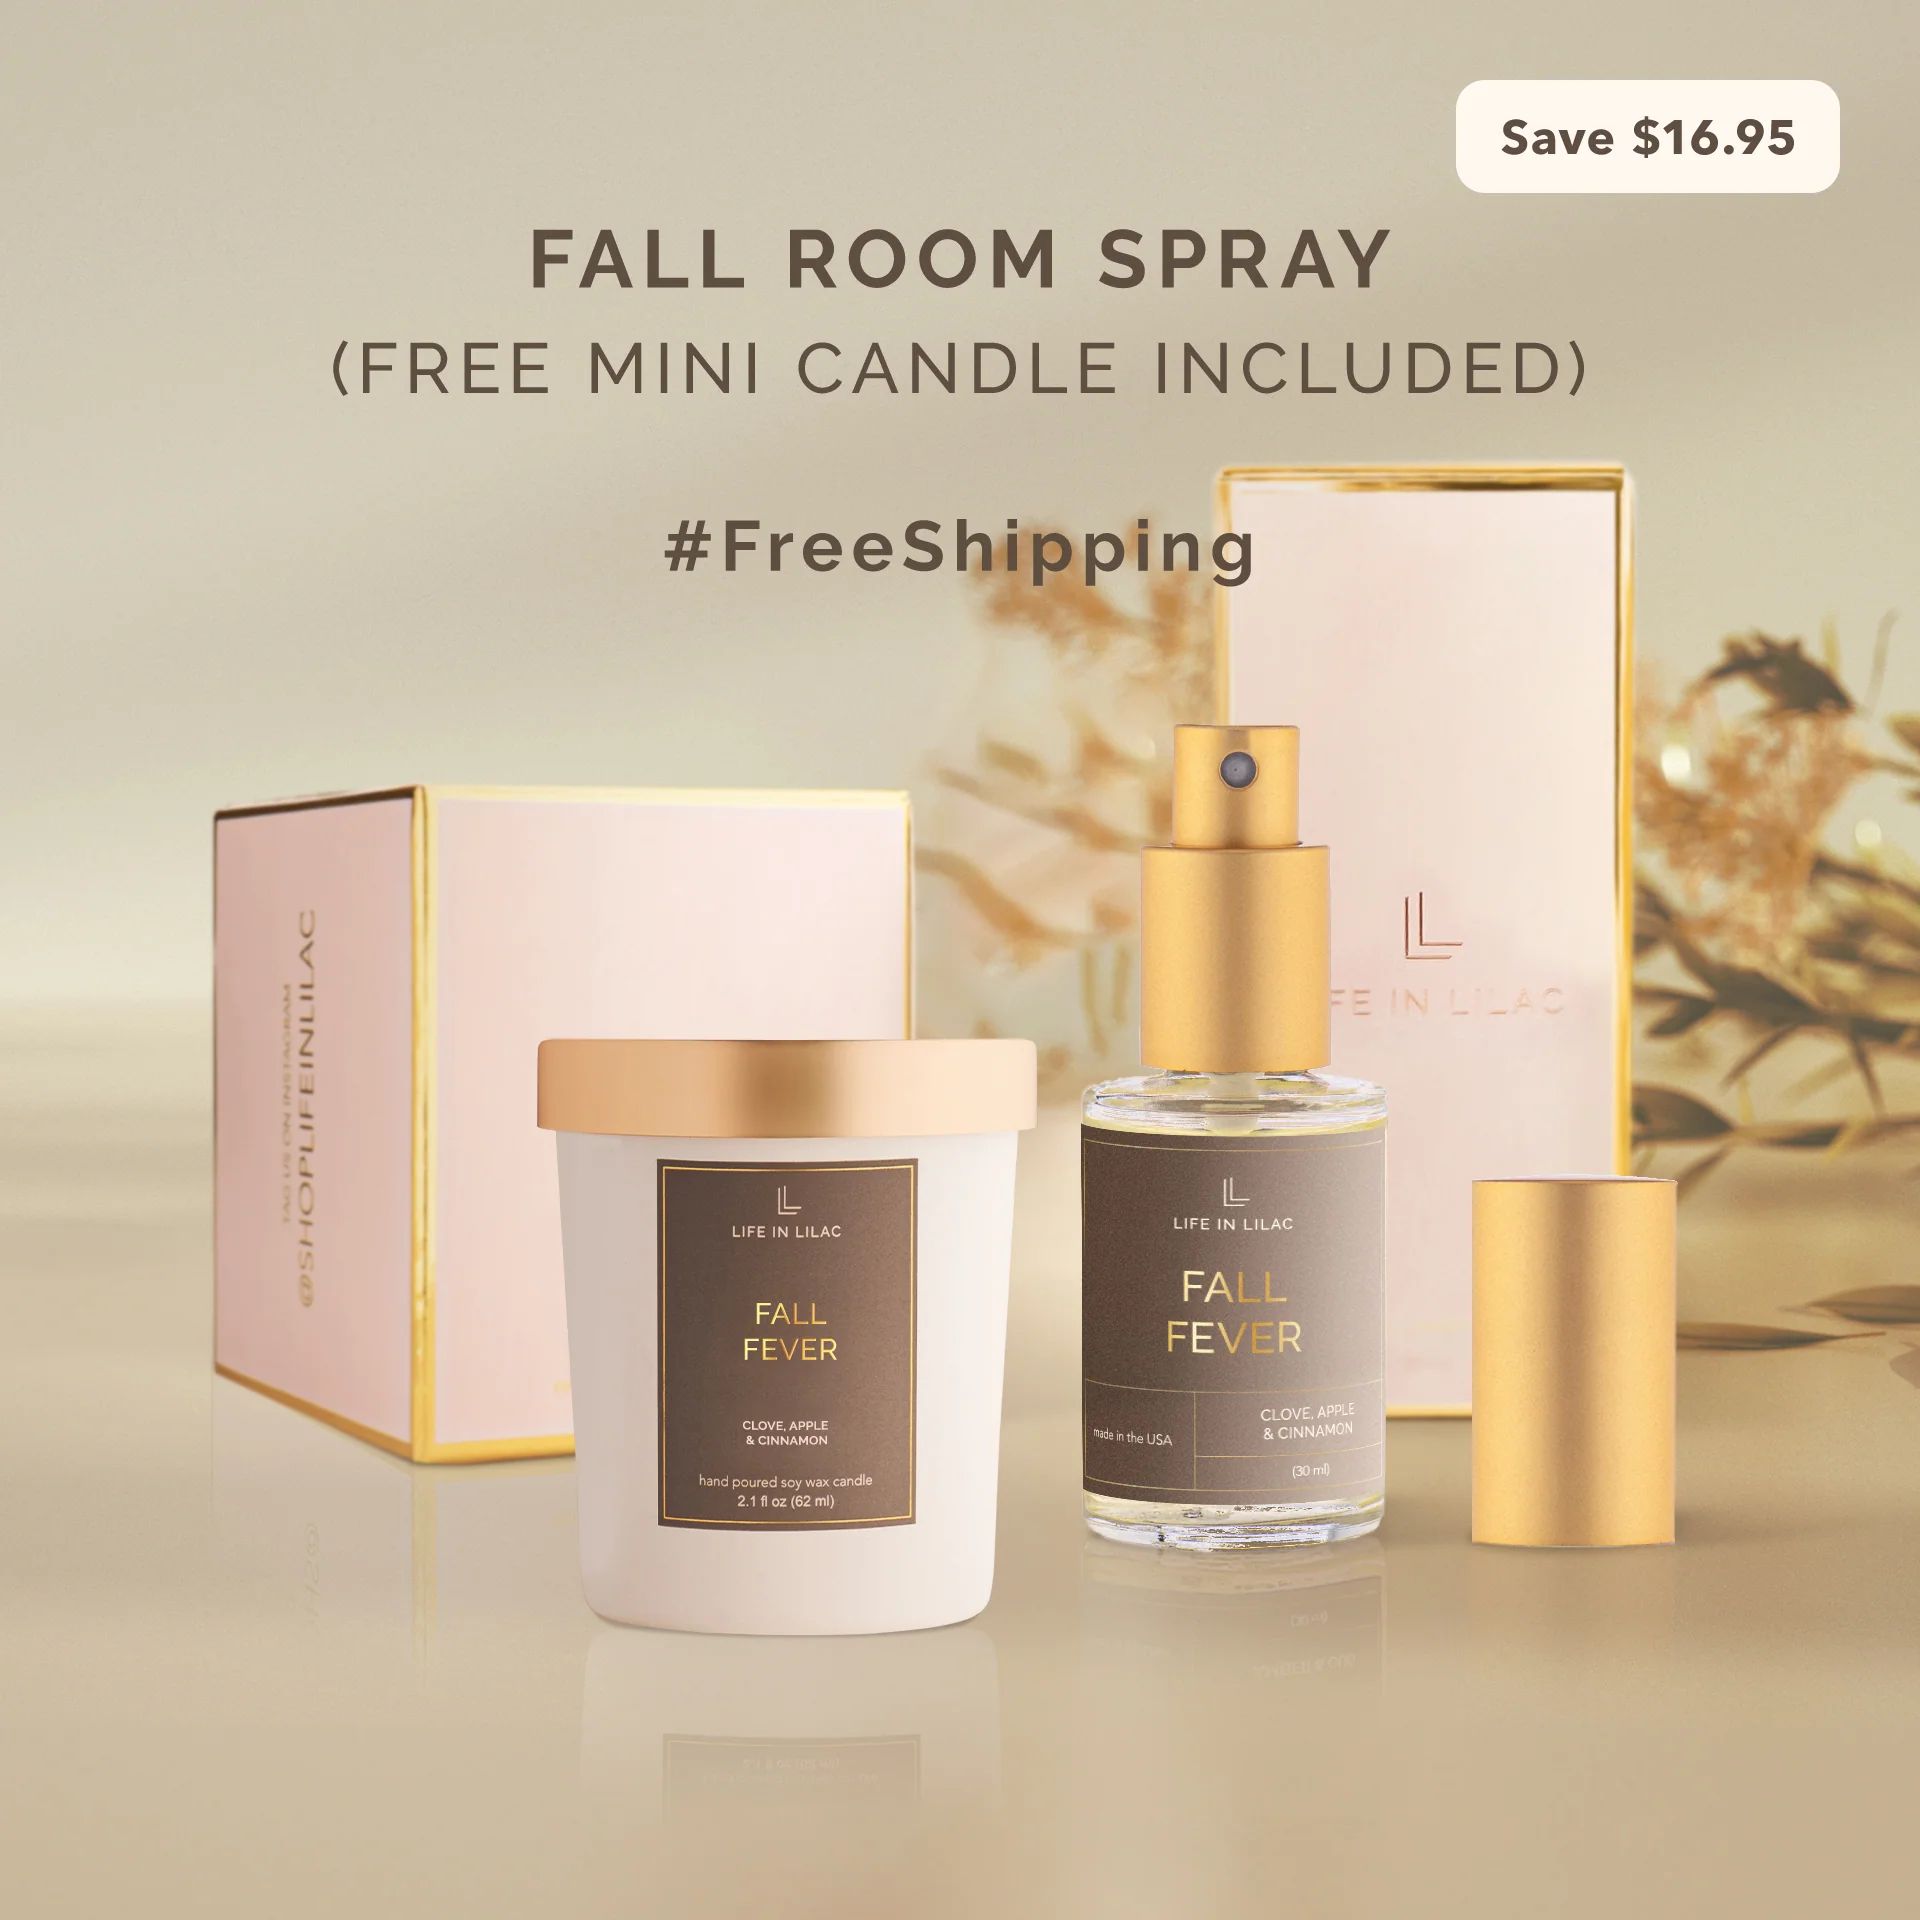 Fall Fever Home Fragrance with Free Mini Candle | Life In Lilac